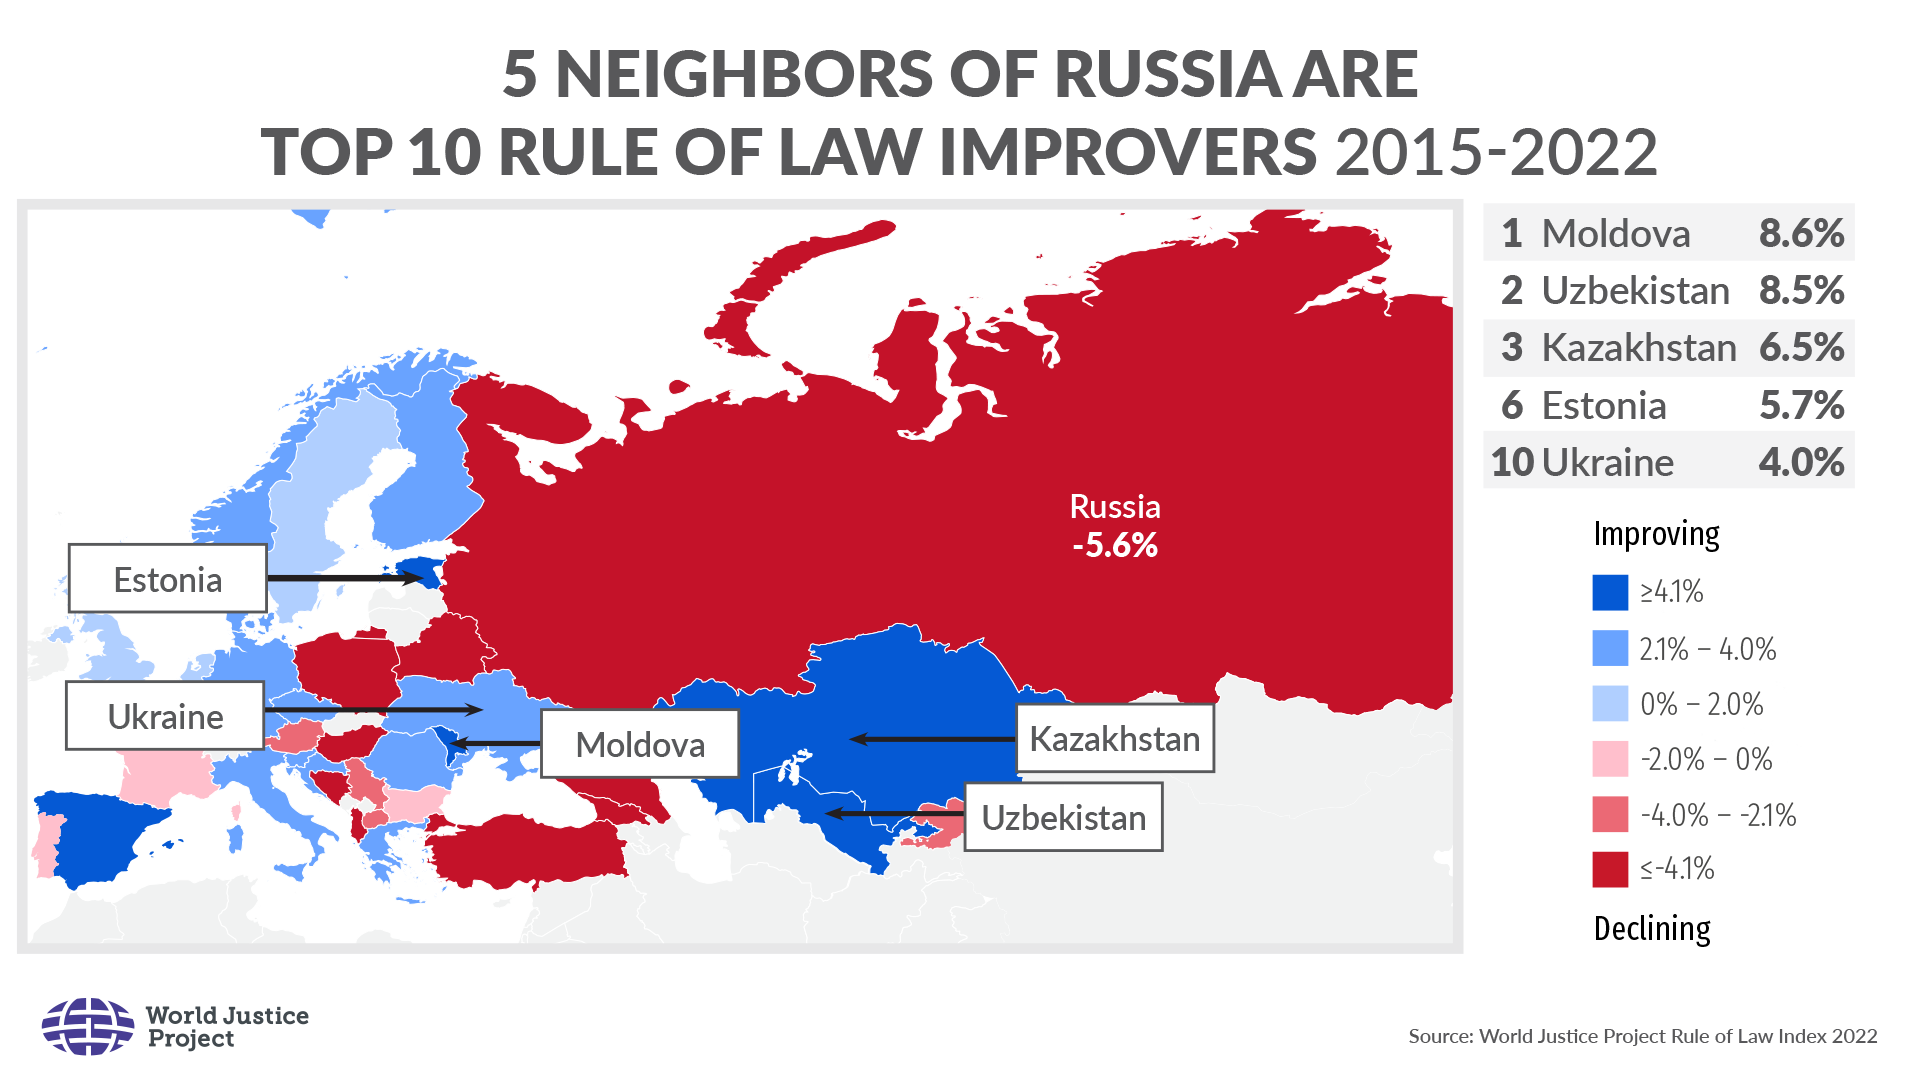 5 Neighbors of Russia Are Top 10 Rule of Law Improvers 2015-2022